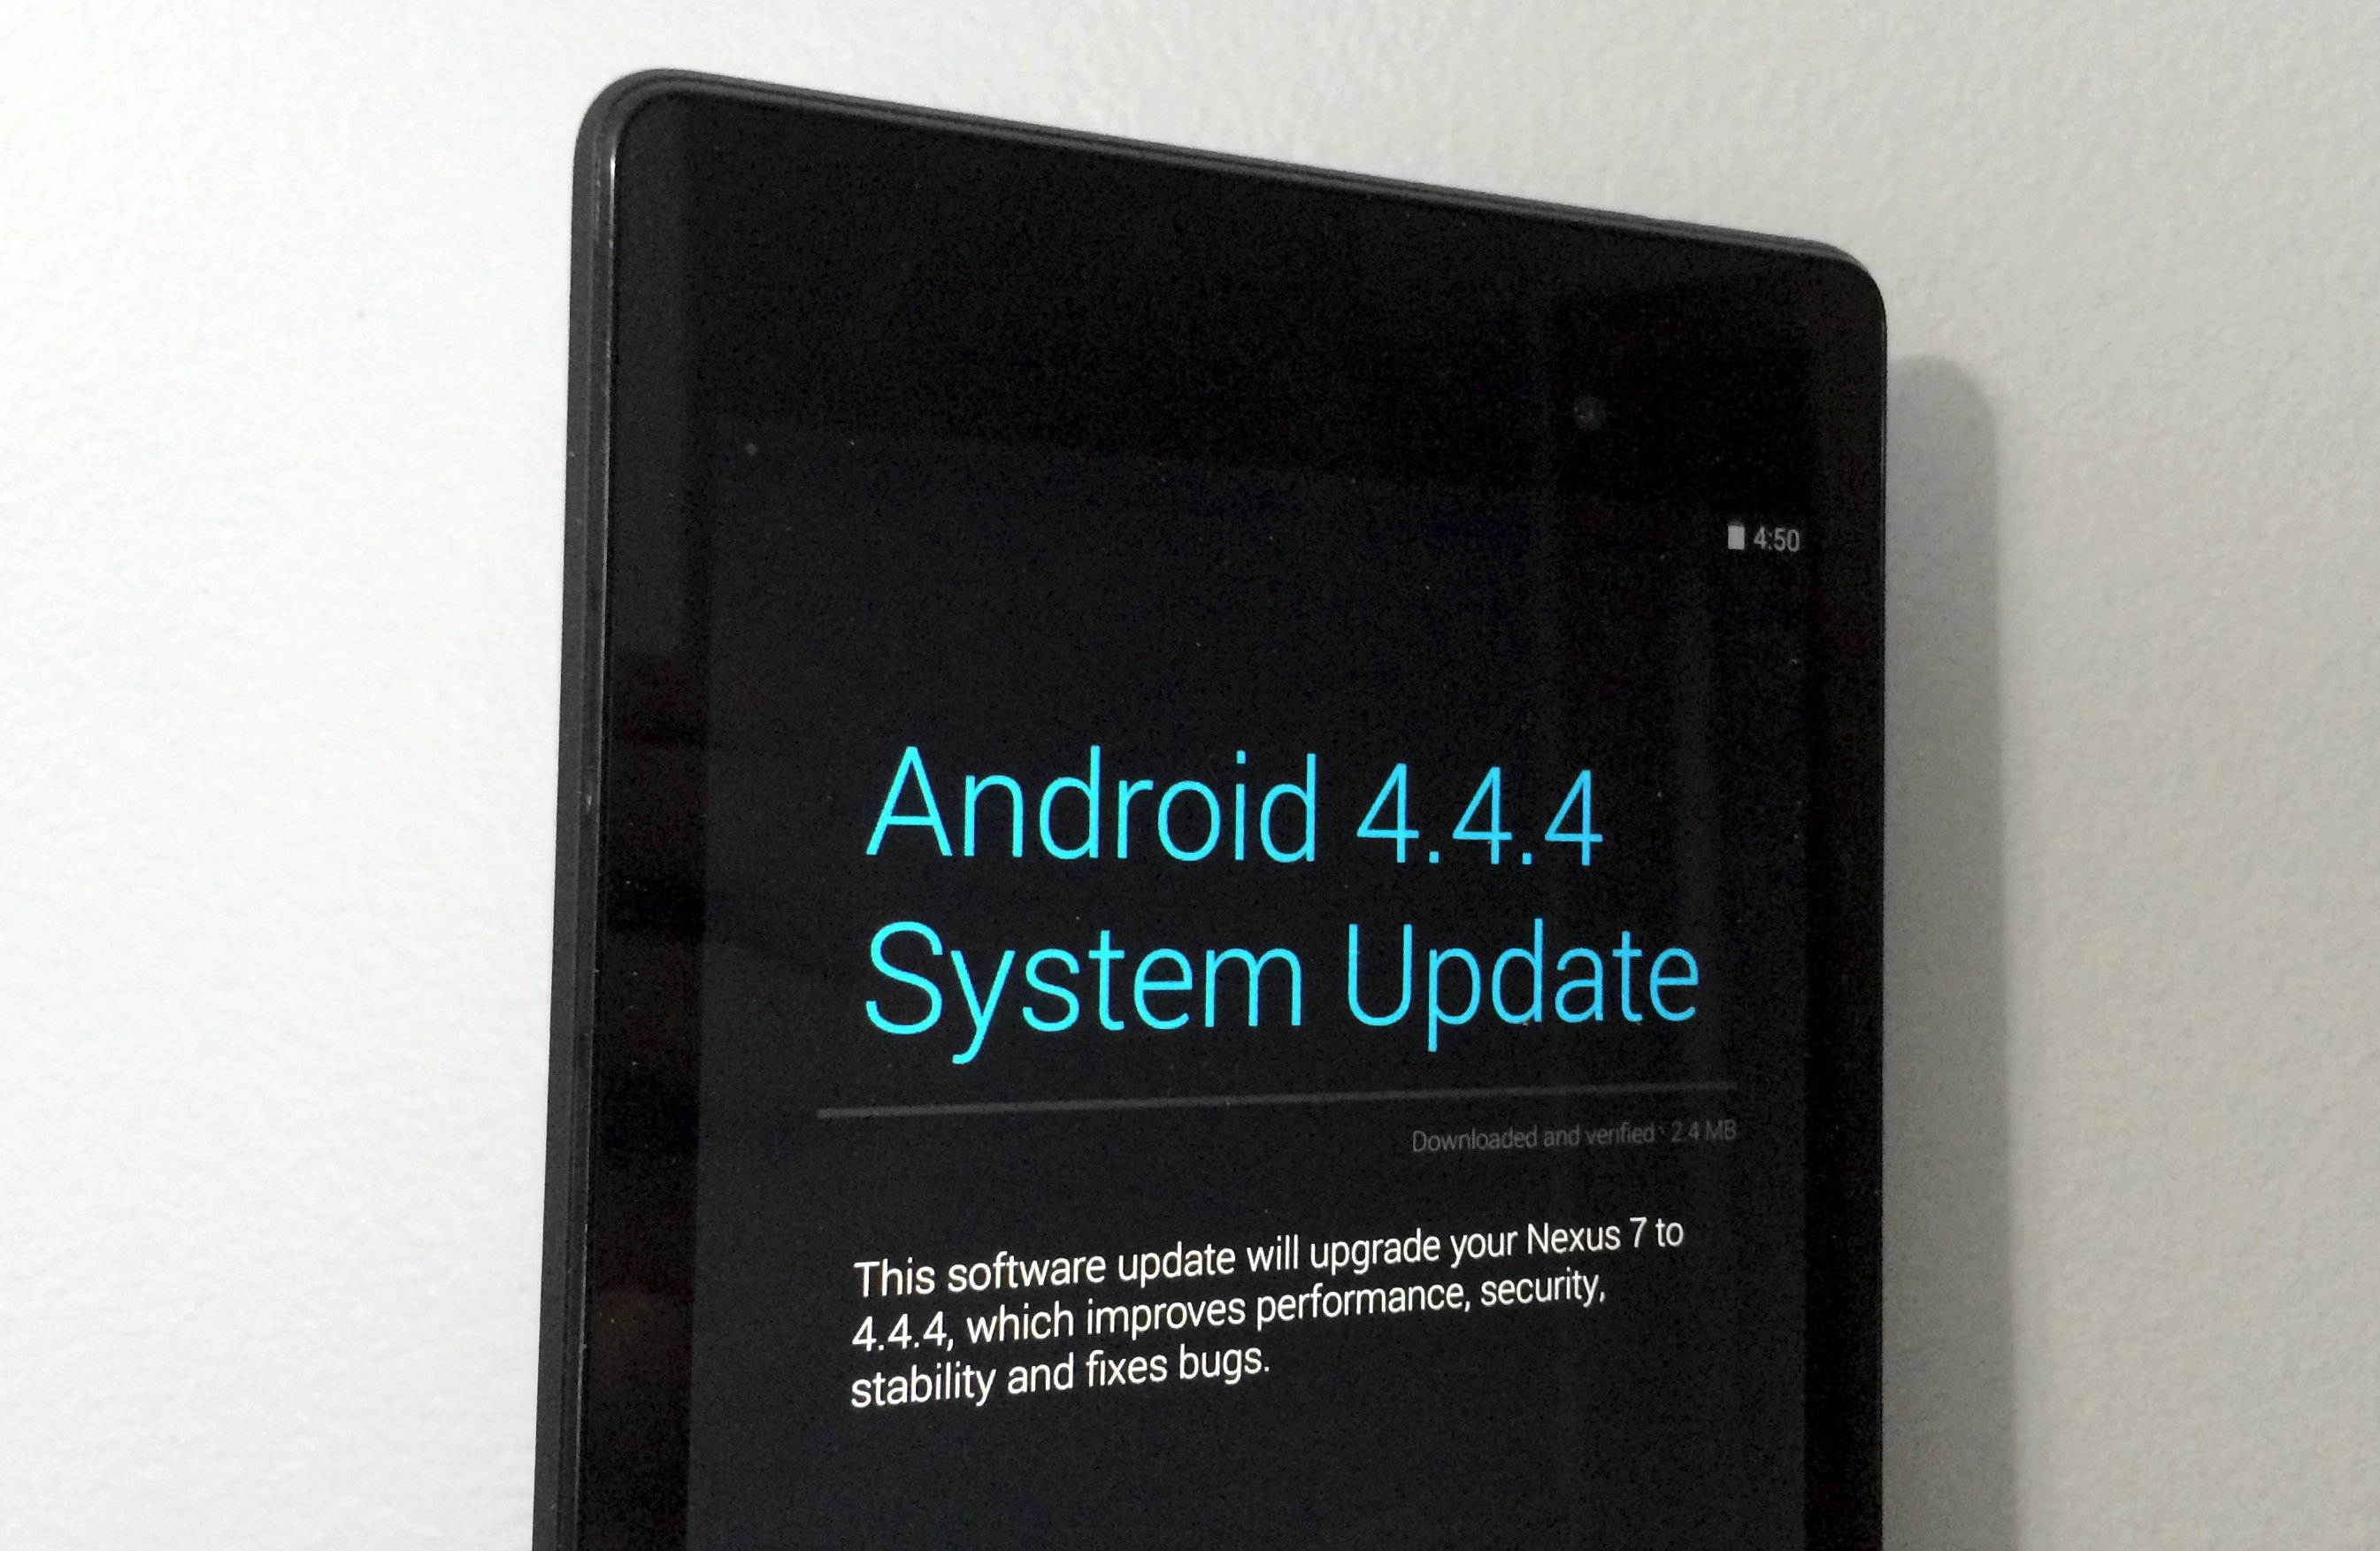 The Android 4.4.4 update installed smoothly on the Nexus 7 2013